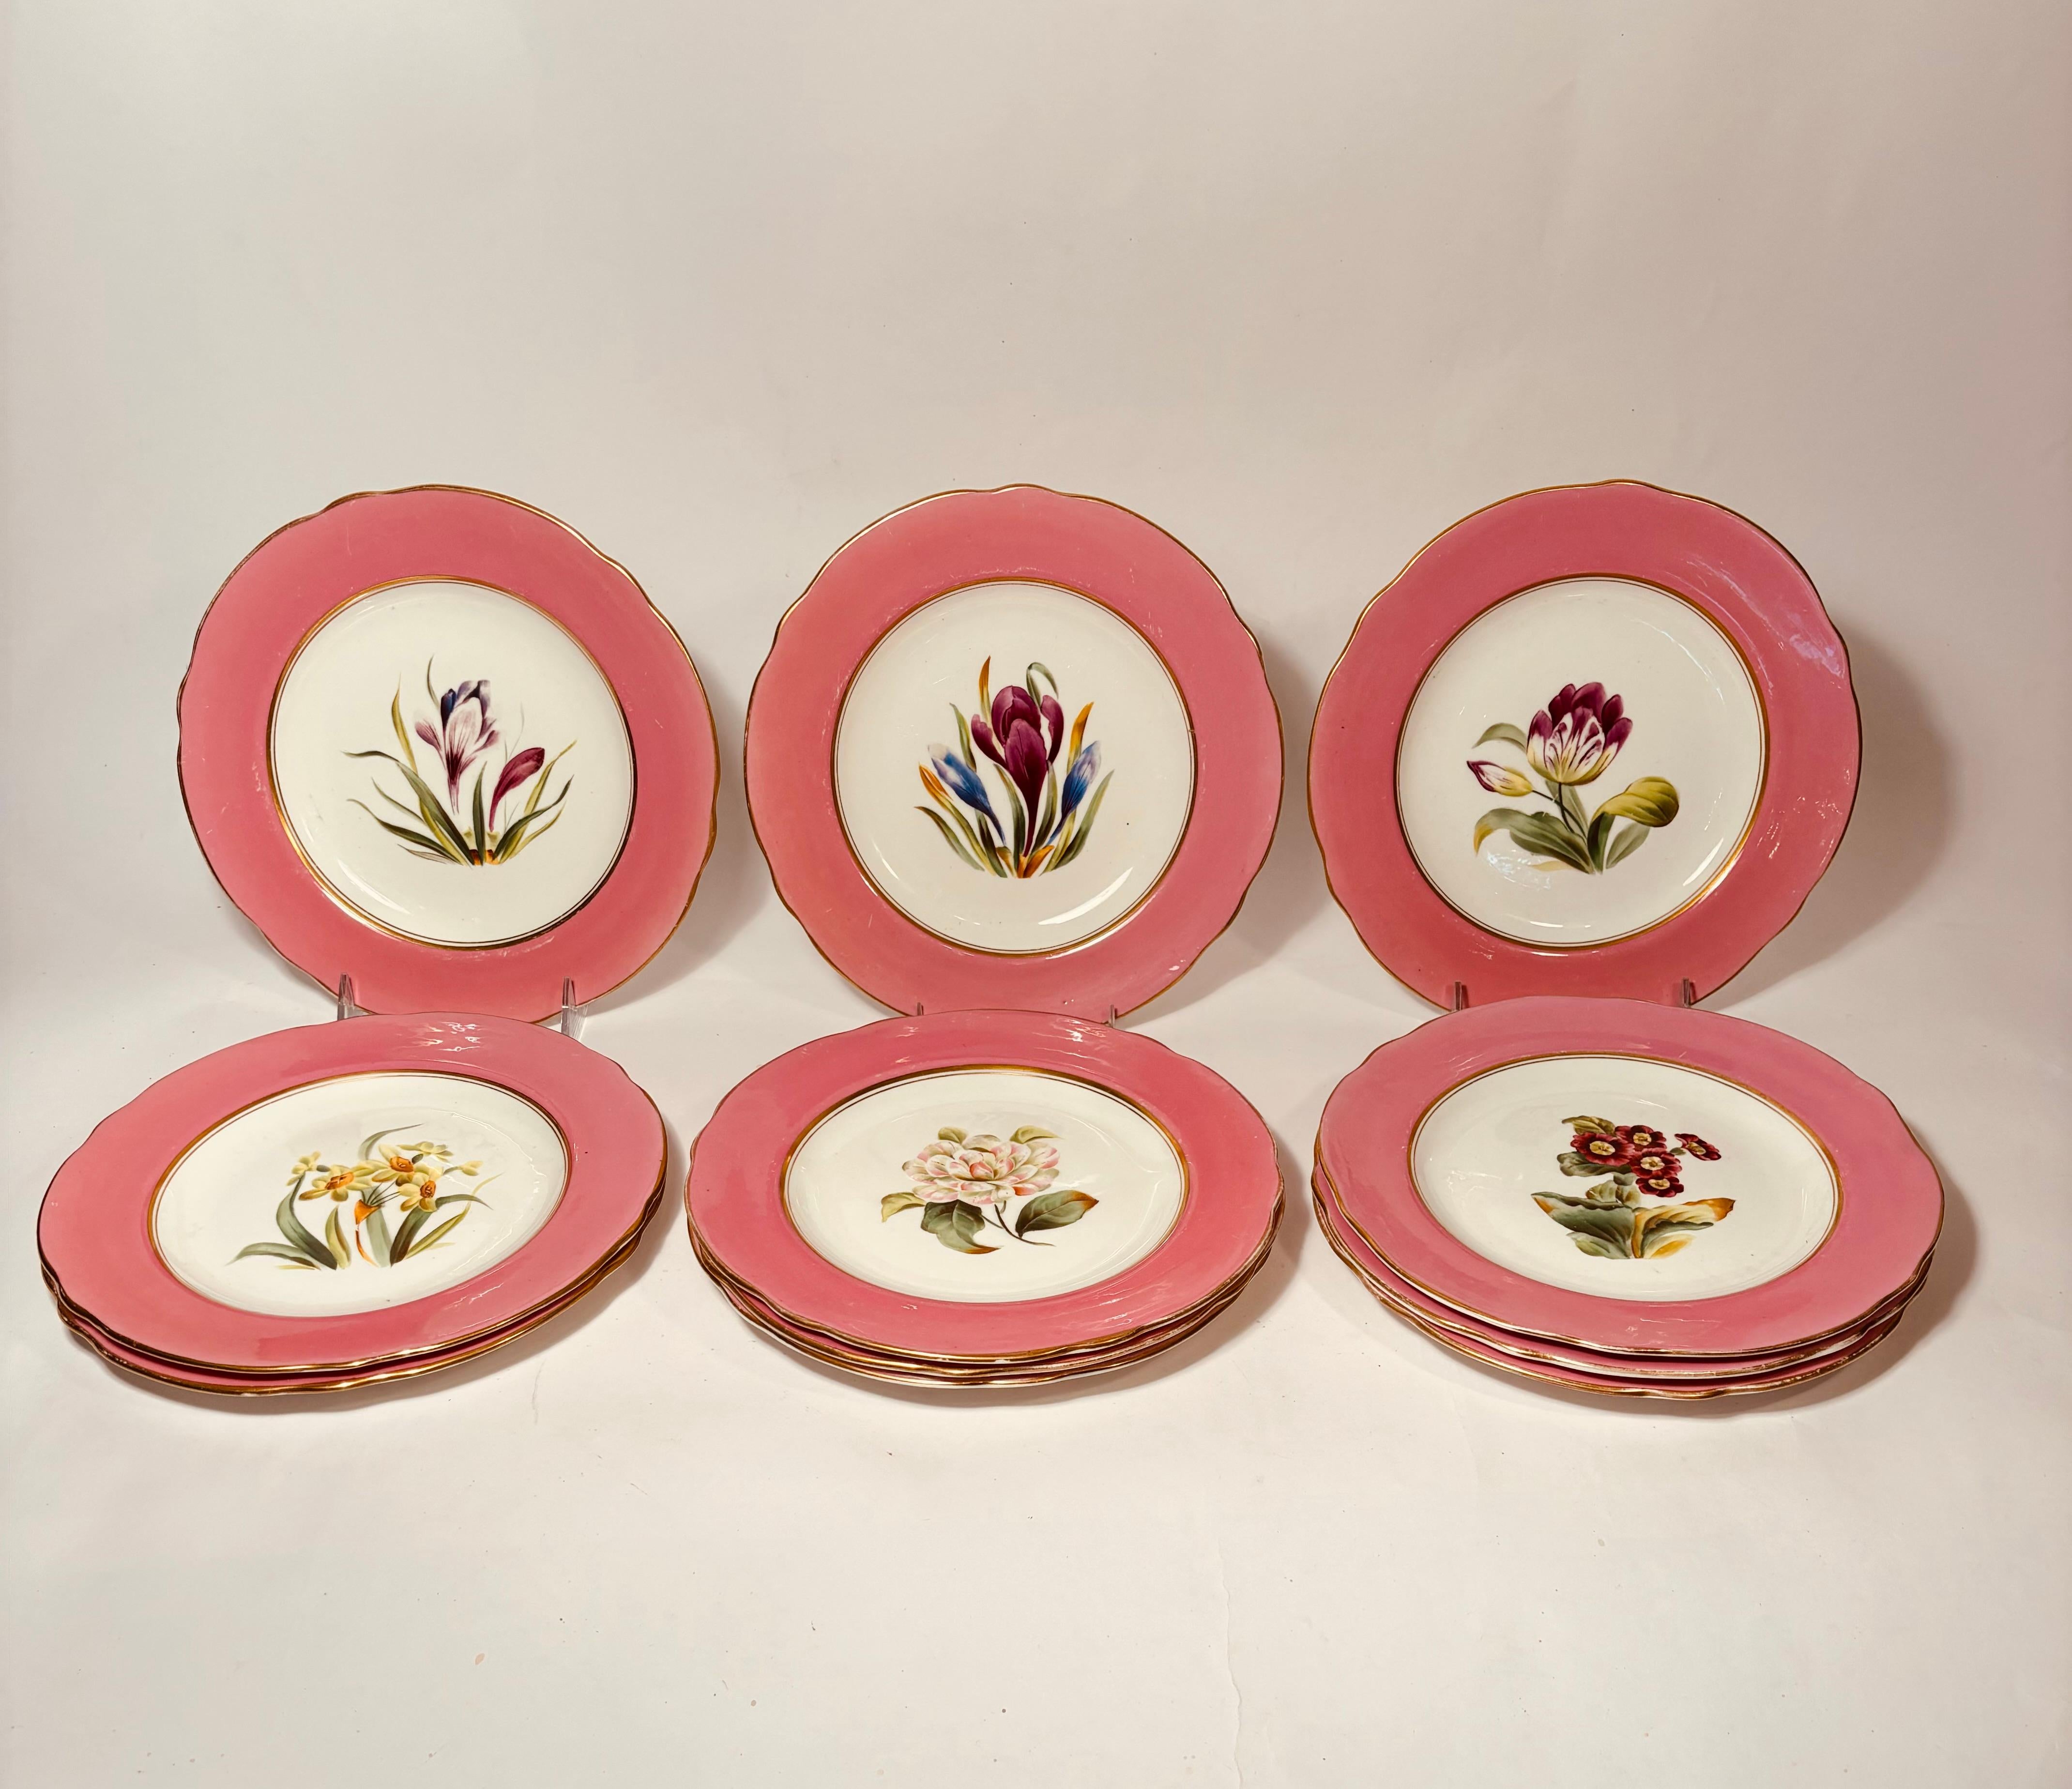 A pretty botanical set of 12 plates attributed to the Ridgway Factory of England. Each plate has a different hand painted flower and a nice wide vibrant pink collar. A scalloped shape enhances the design and they all retain their nice gilded edges.